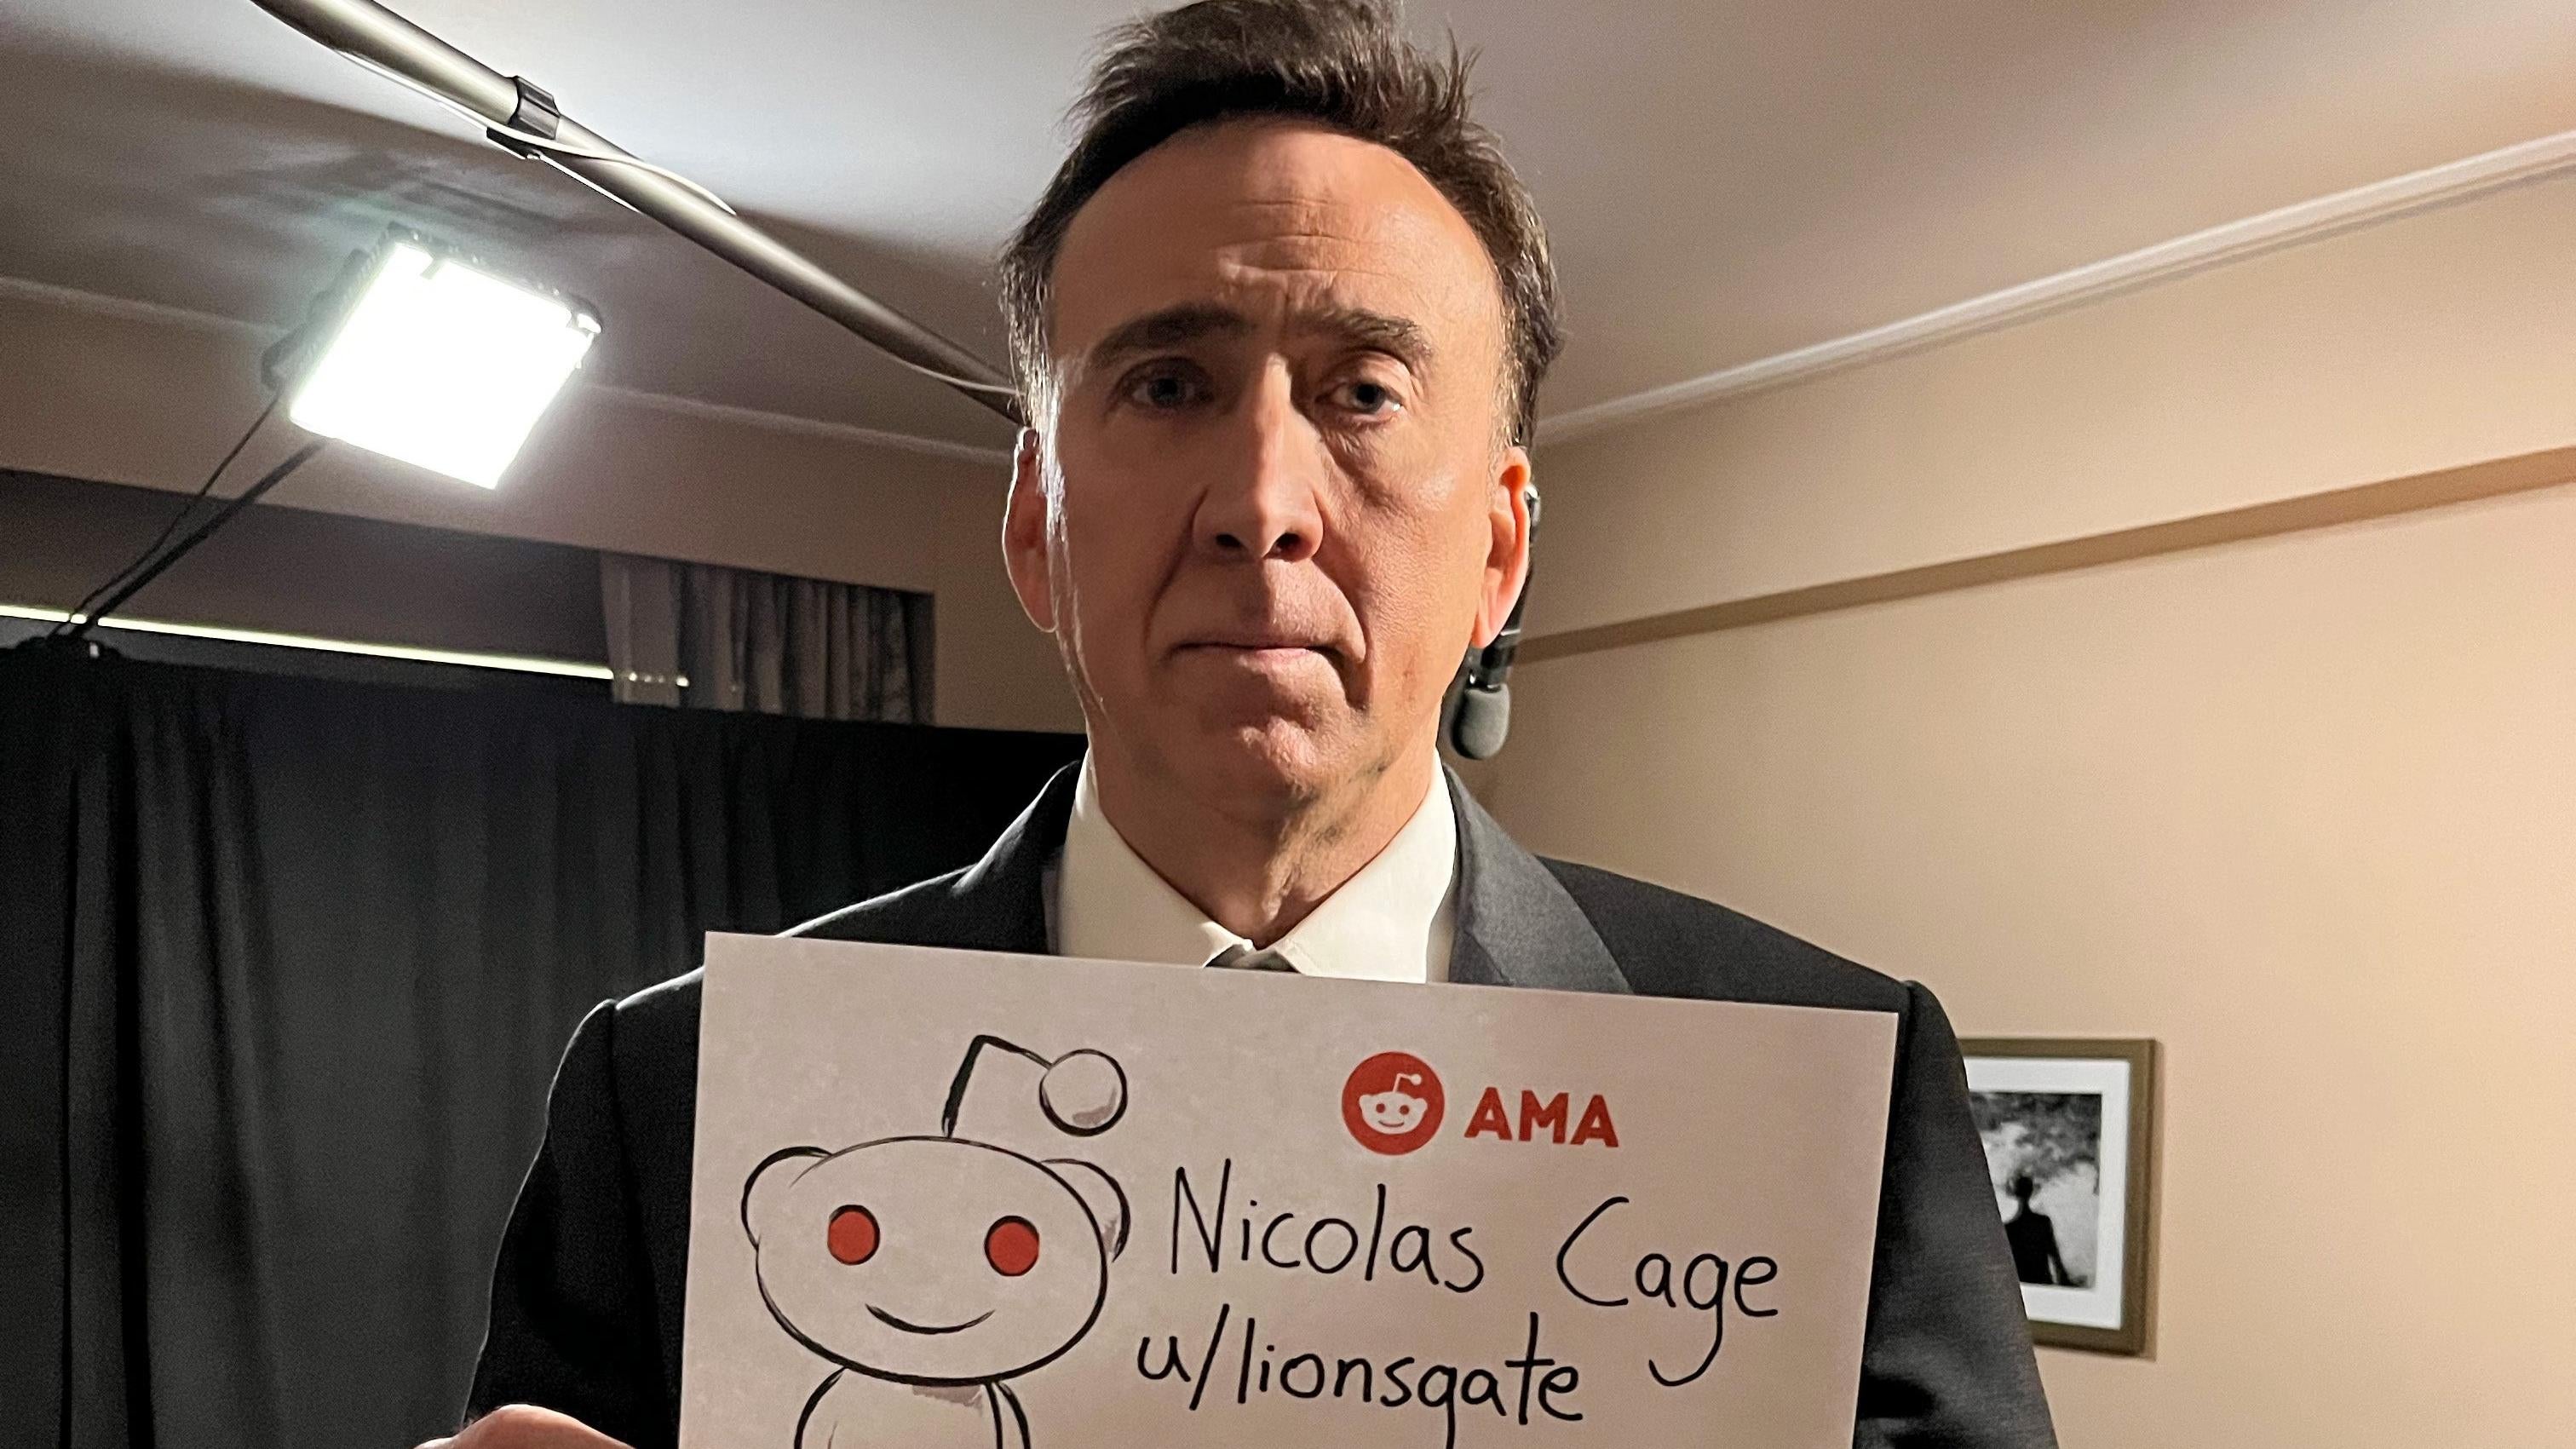 Nicolas Cage hosted an AMA on Reddit earlier this year. (Photo: u/Lionsgate)